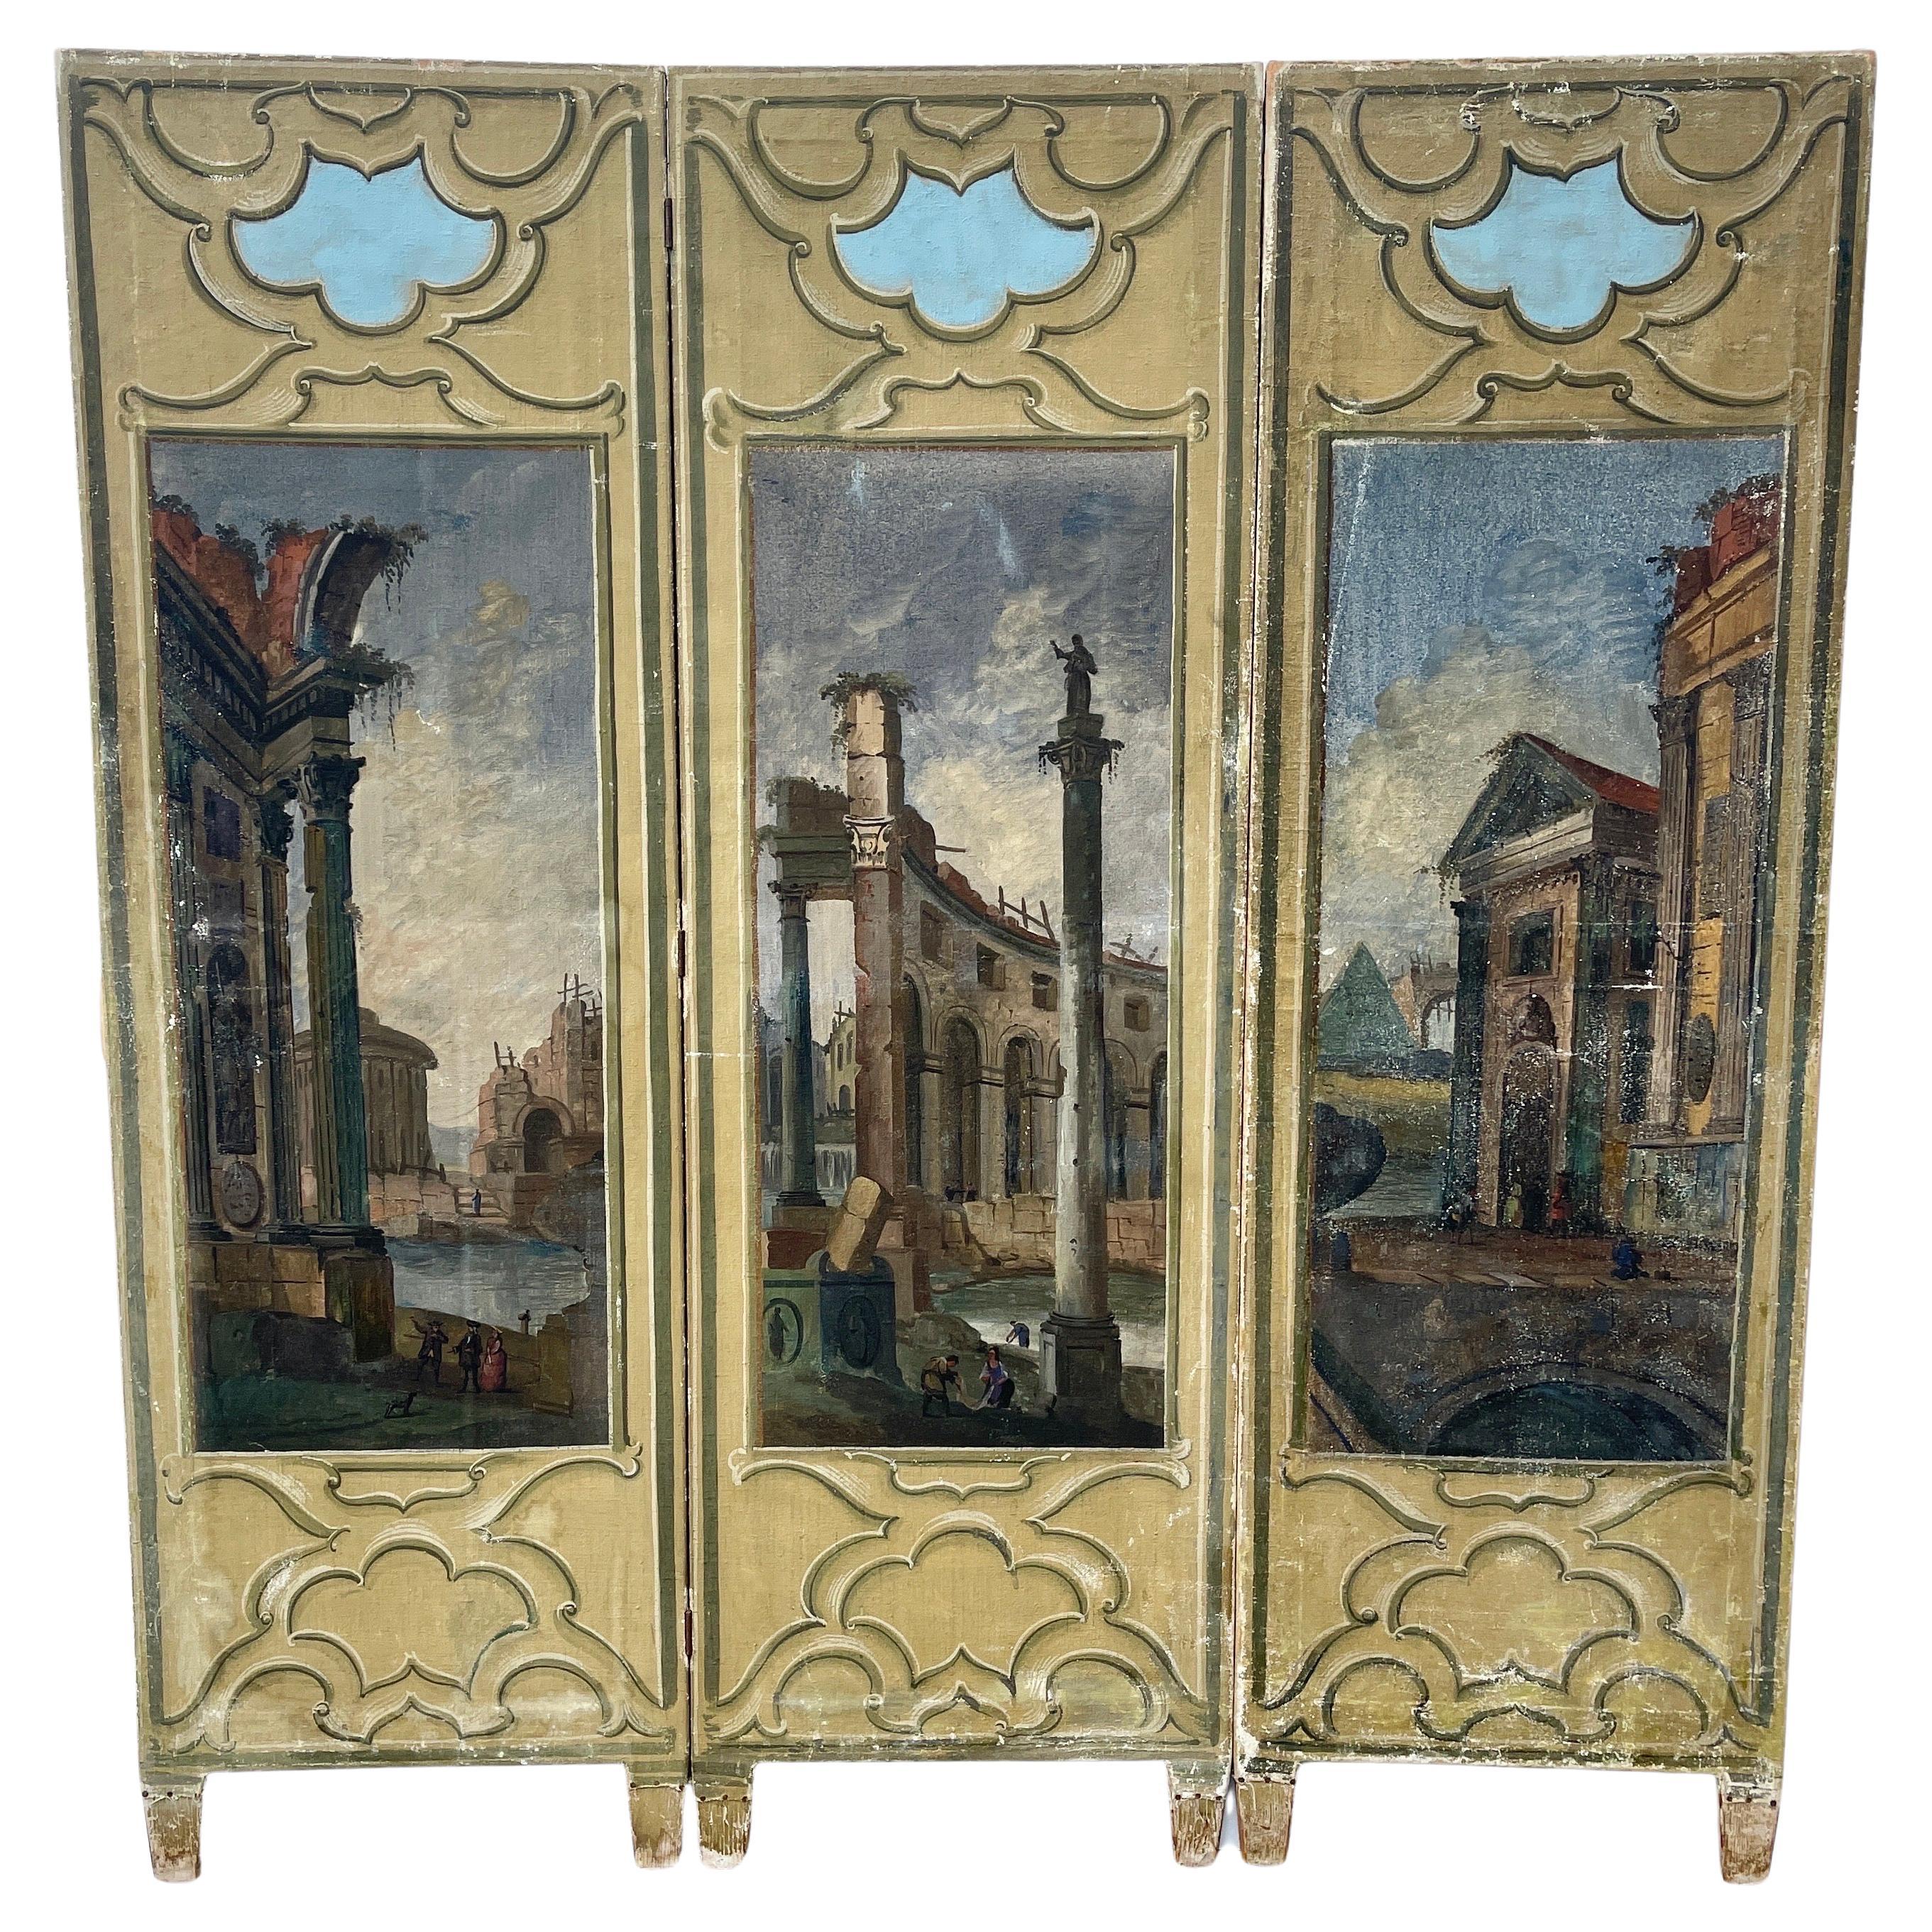 Italian Neoclassical 3 Panel Hand Painted Room Divider Screen 